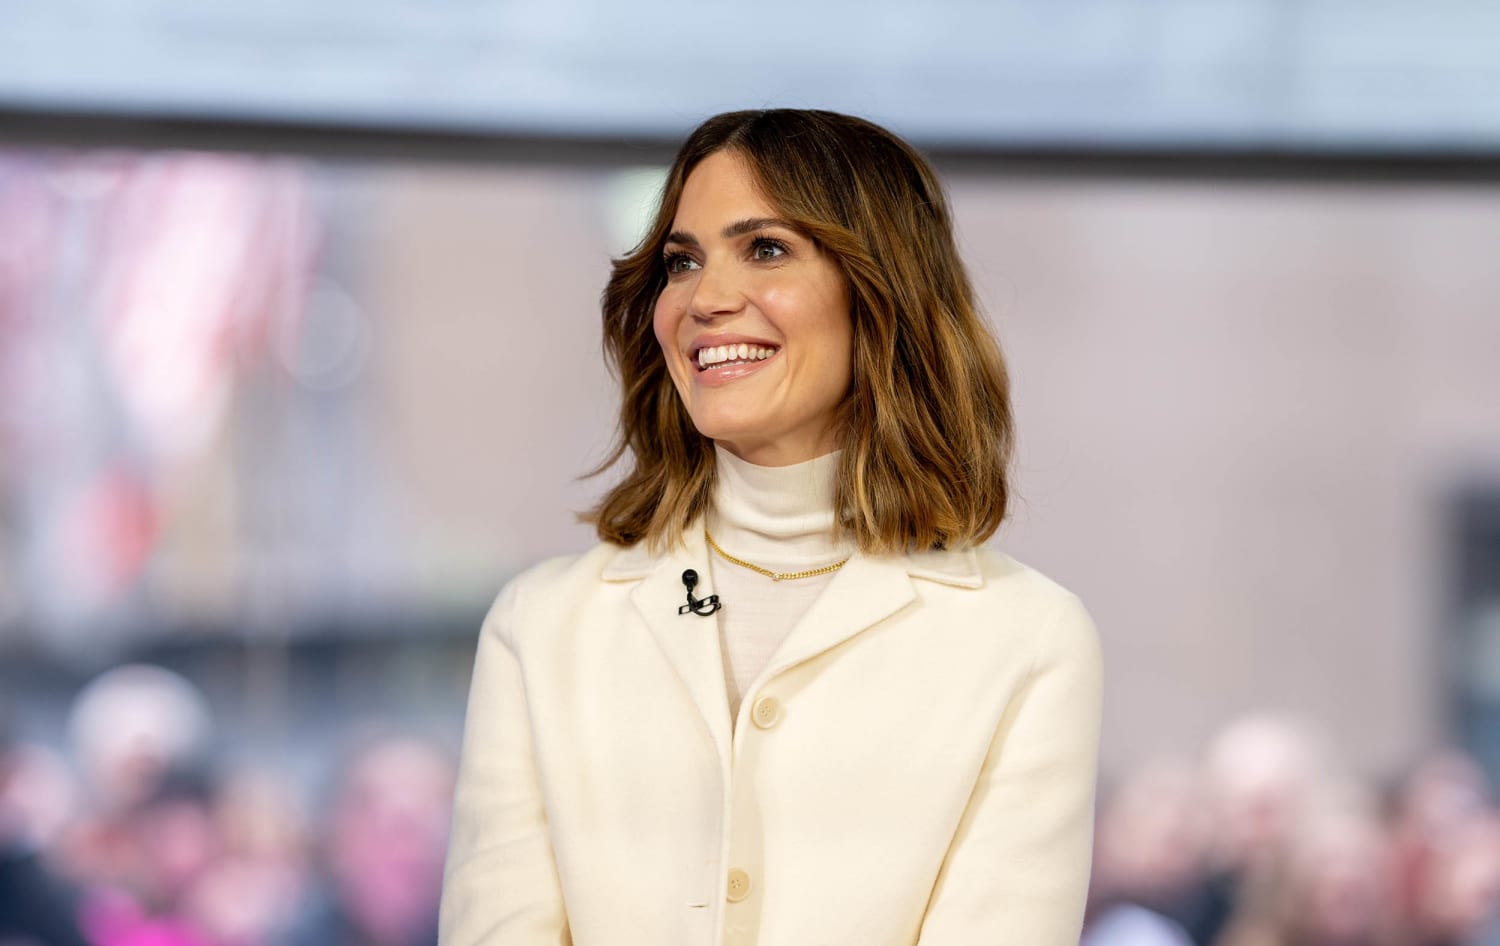 Mandy Moore shares first baby bump pic since announcing pregnancy